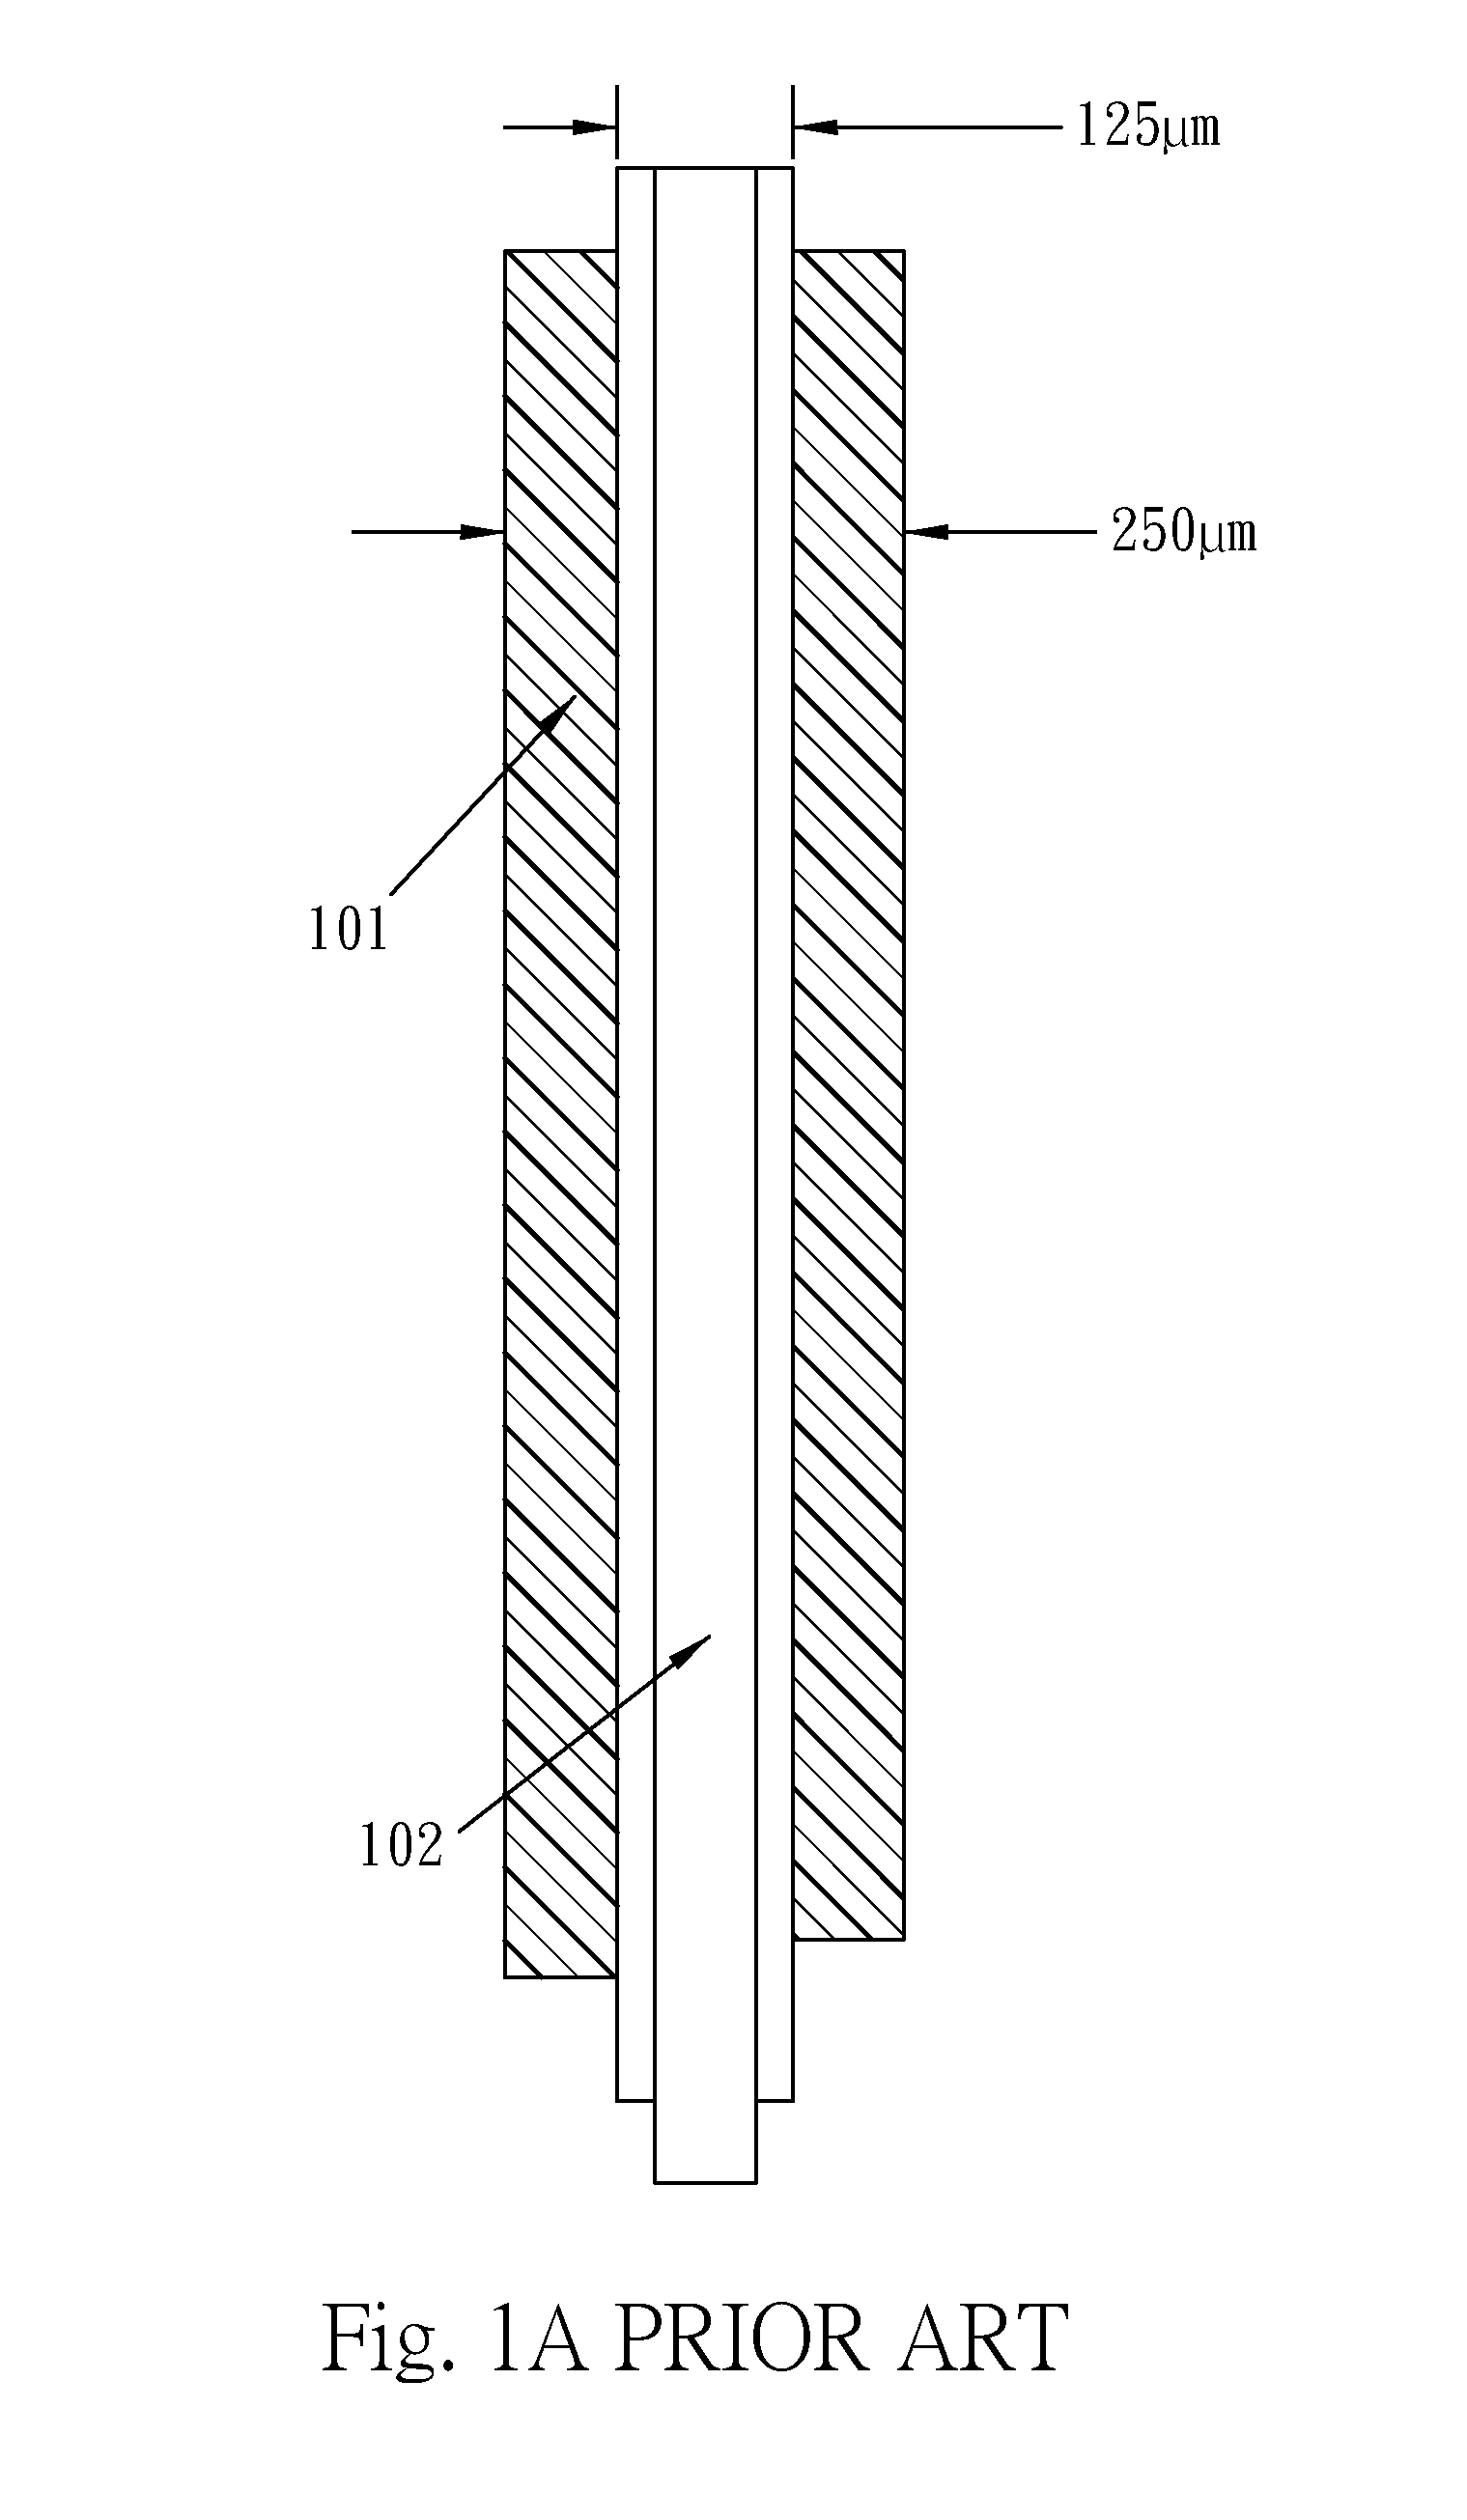 Self-tensed and fully spring jacketed optical fiber sensing structure